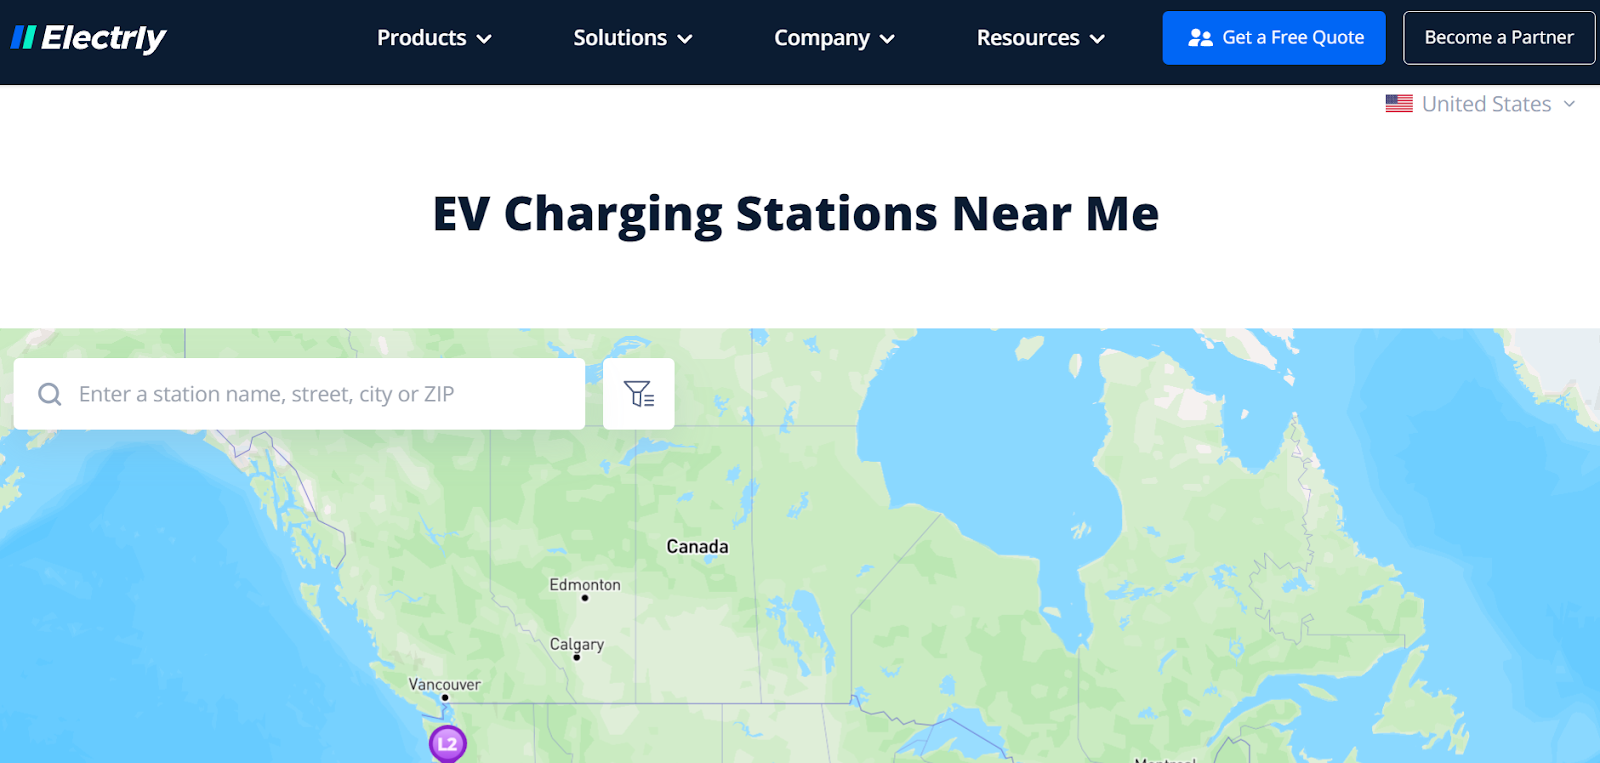 How to Find the Best EV Charging Stations Nearby: Tips and Tricks